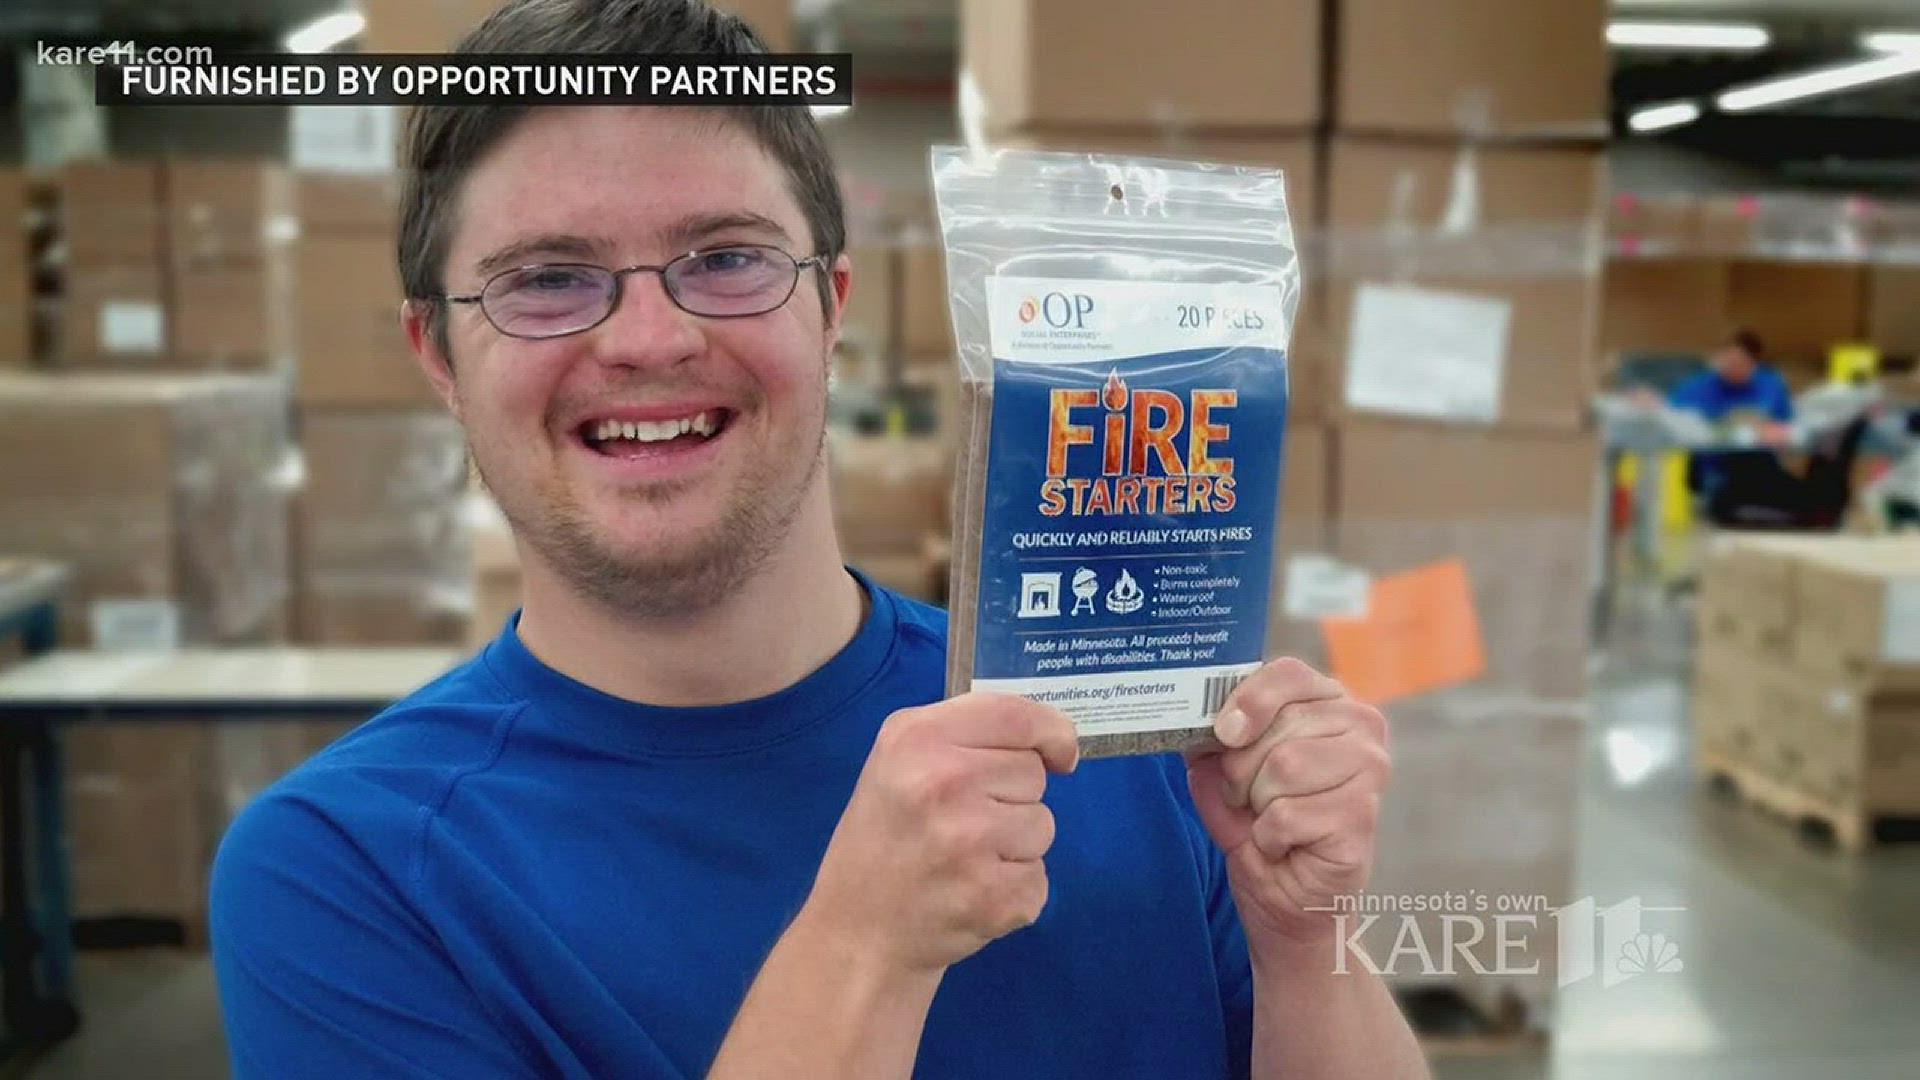 Opportunity Partners employees people with disabilities and this year has launched a new product, fire starters.